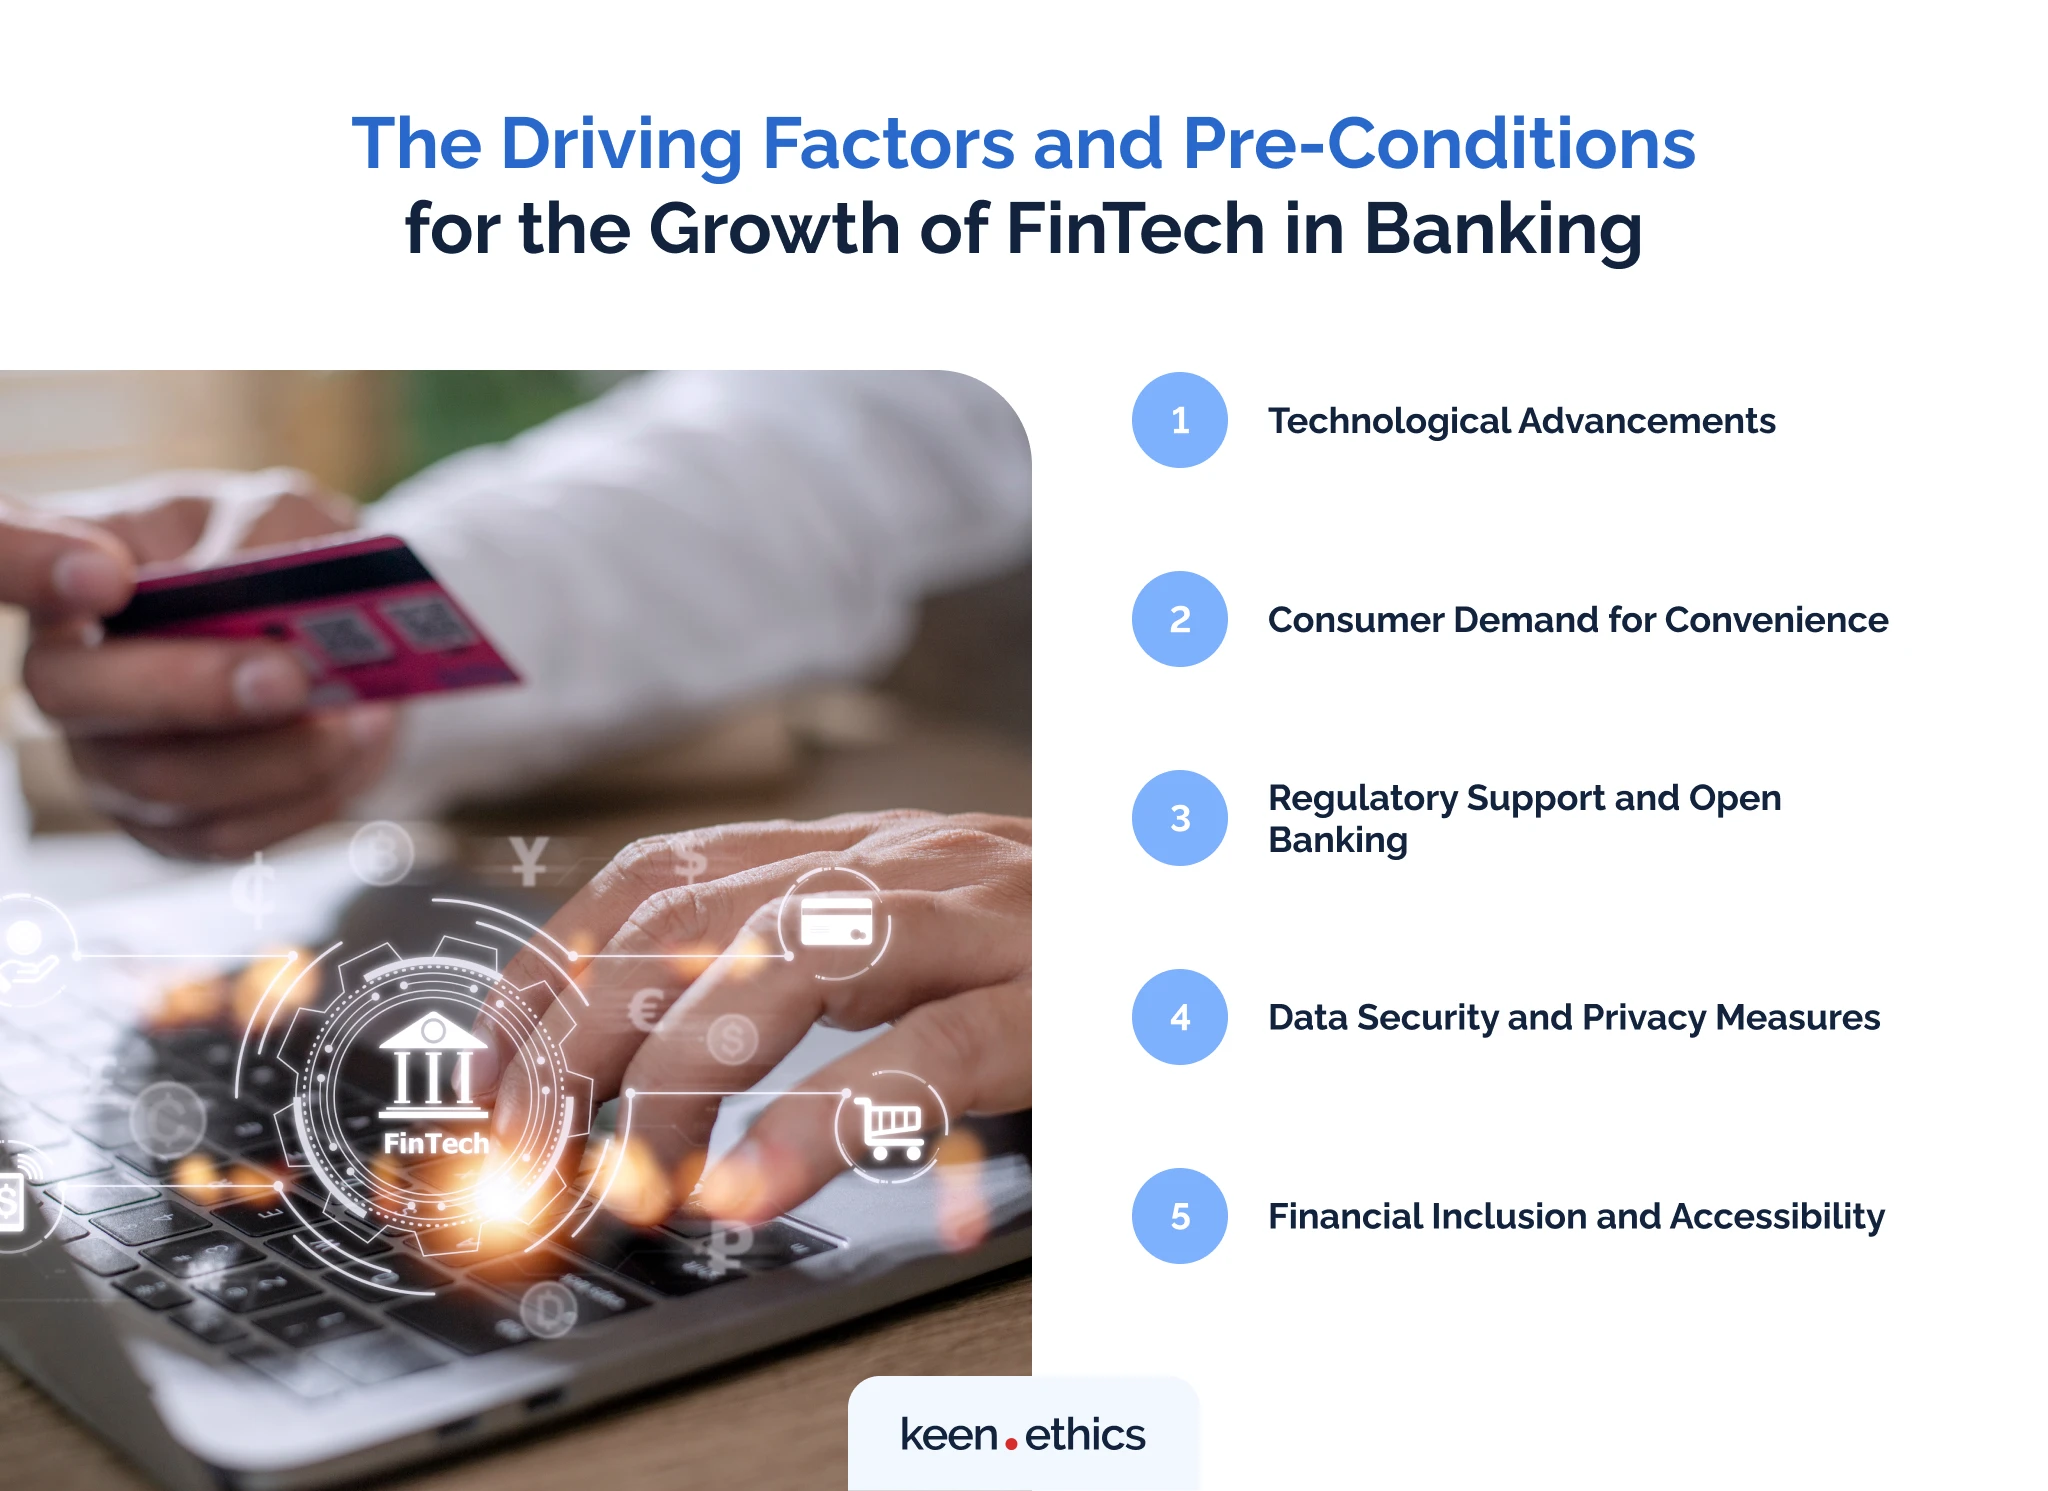 The driving factors and pre-conditions for the growth of fintech in banking